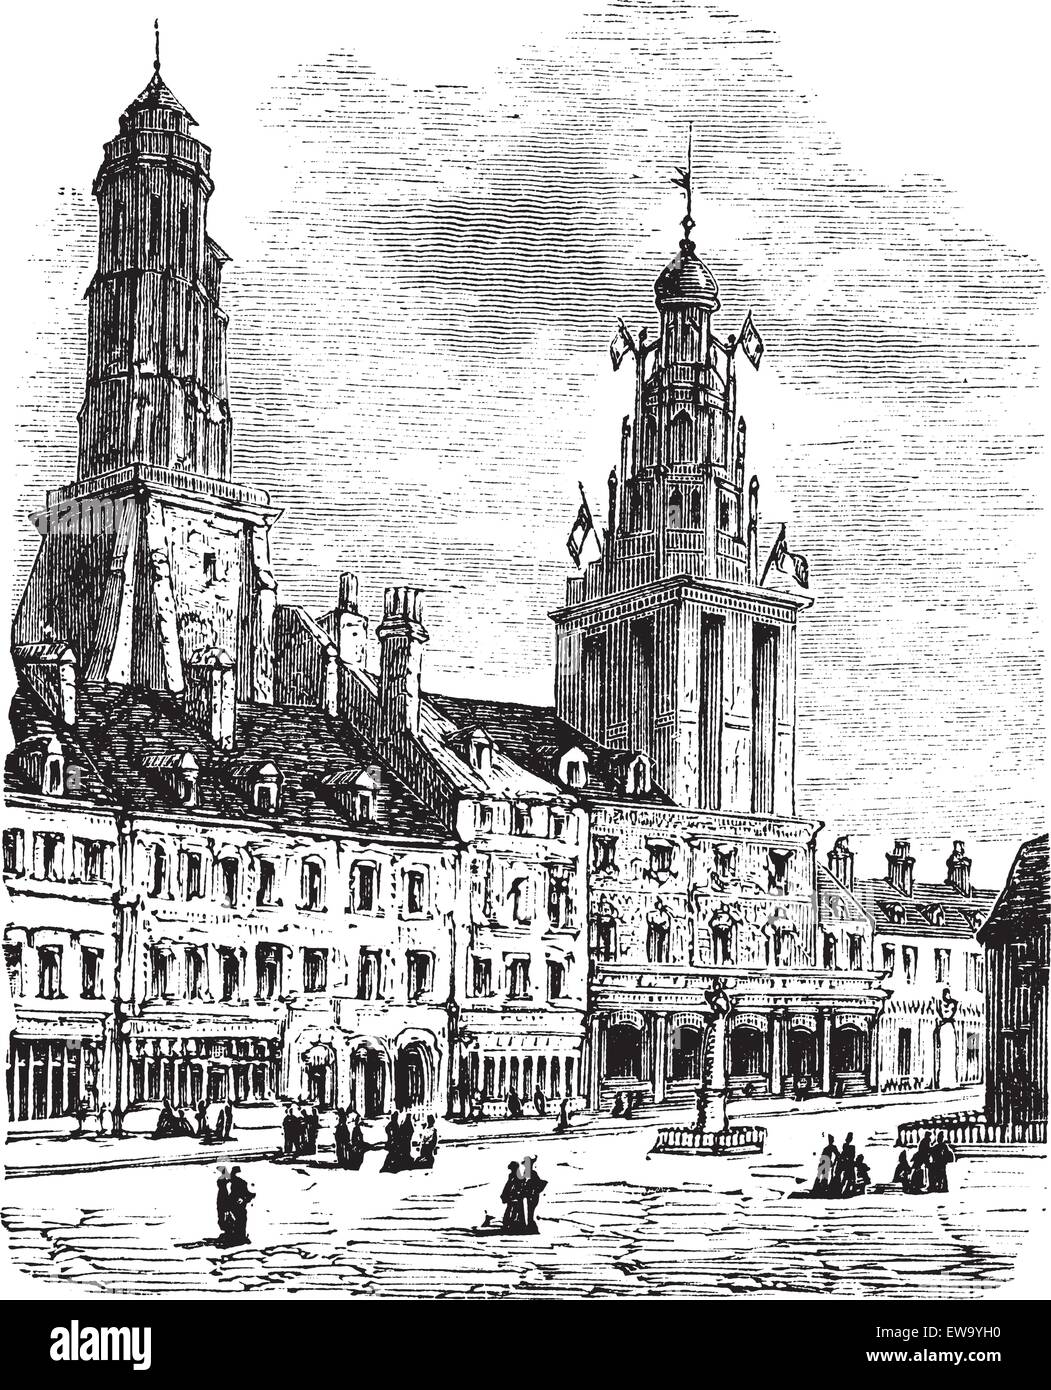 Calais city in France. City square, city hall and lighthouse vintage engraving. Old engraved illustration of a city scen in Calais, 1890. Stock Vector